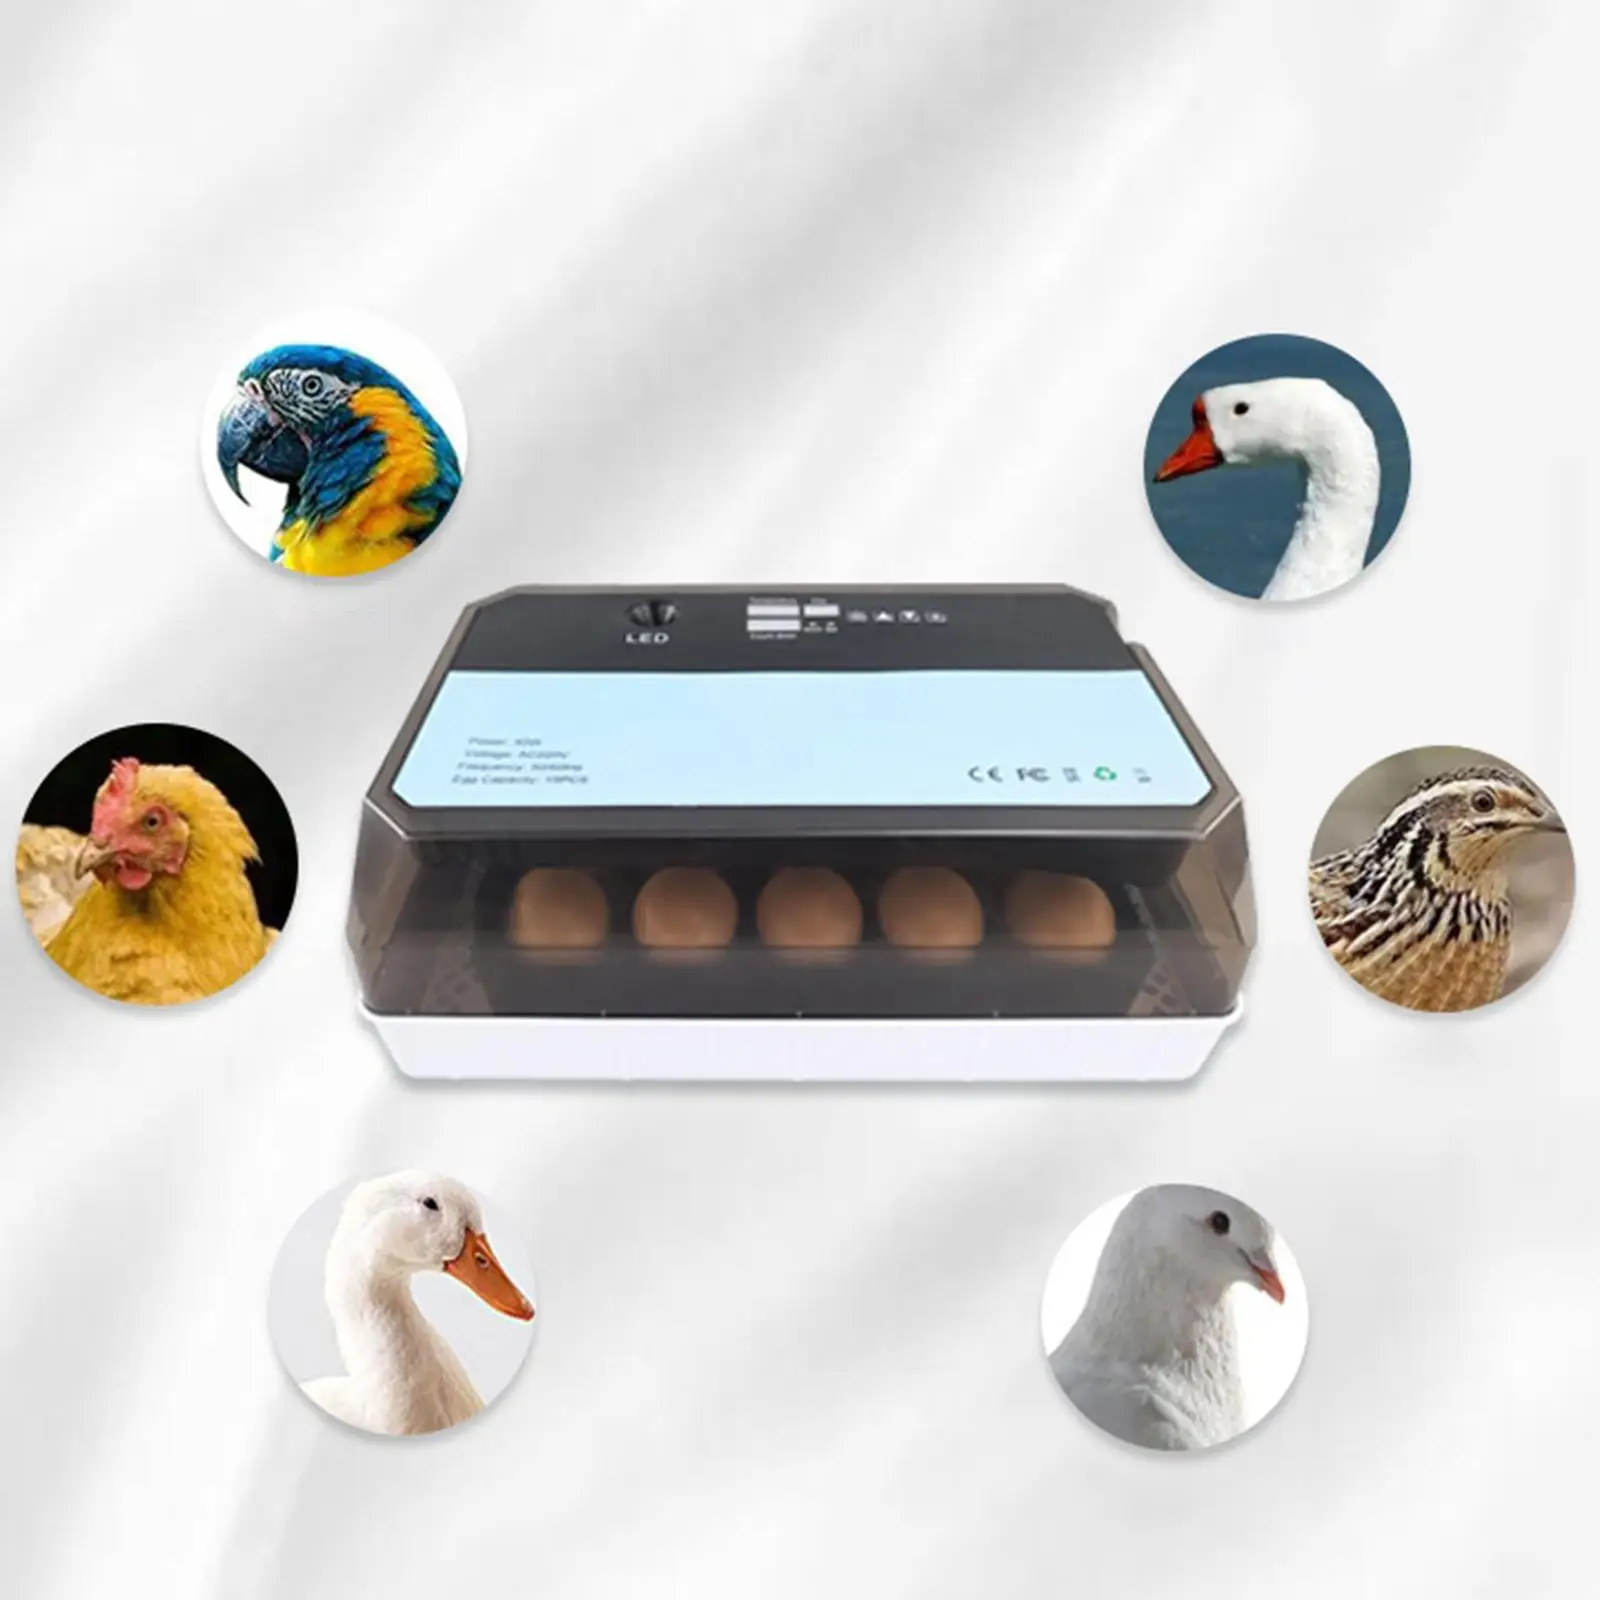 15 Eggs Incubator Automatic Temperature Control with Feeding and Drinking Bucket with Light Egg Hatcher for Hatching Chickens